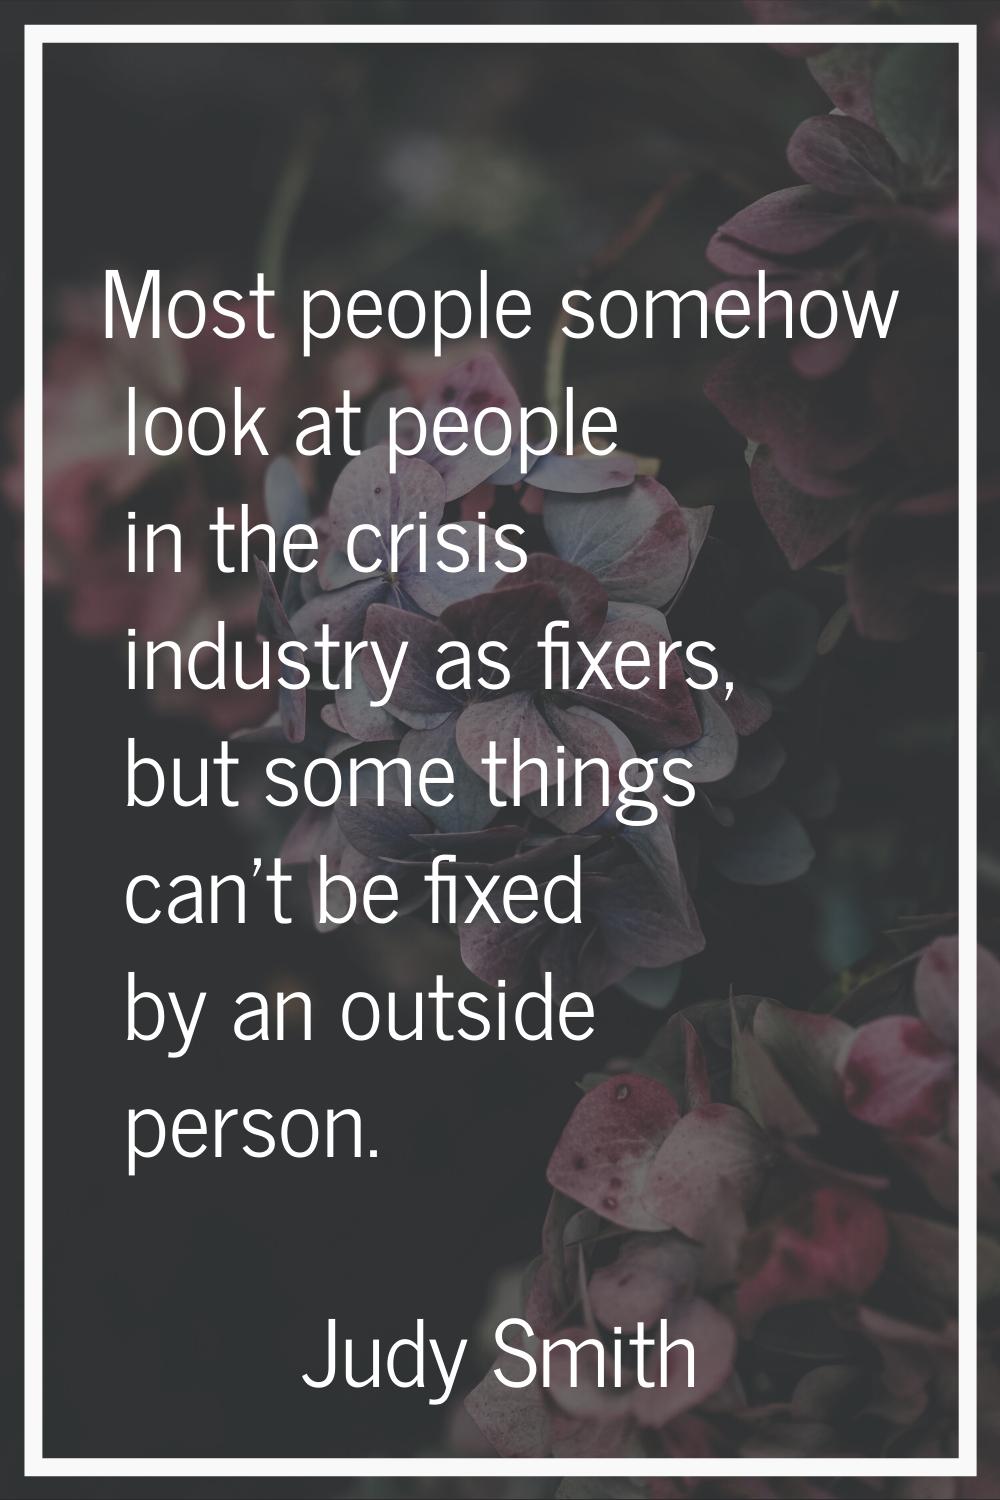 Most people somehow look at people in the crisis industry as fixers, but some things can't be fixed